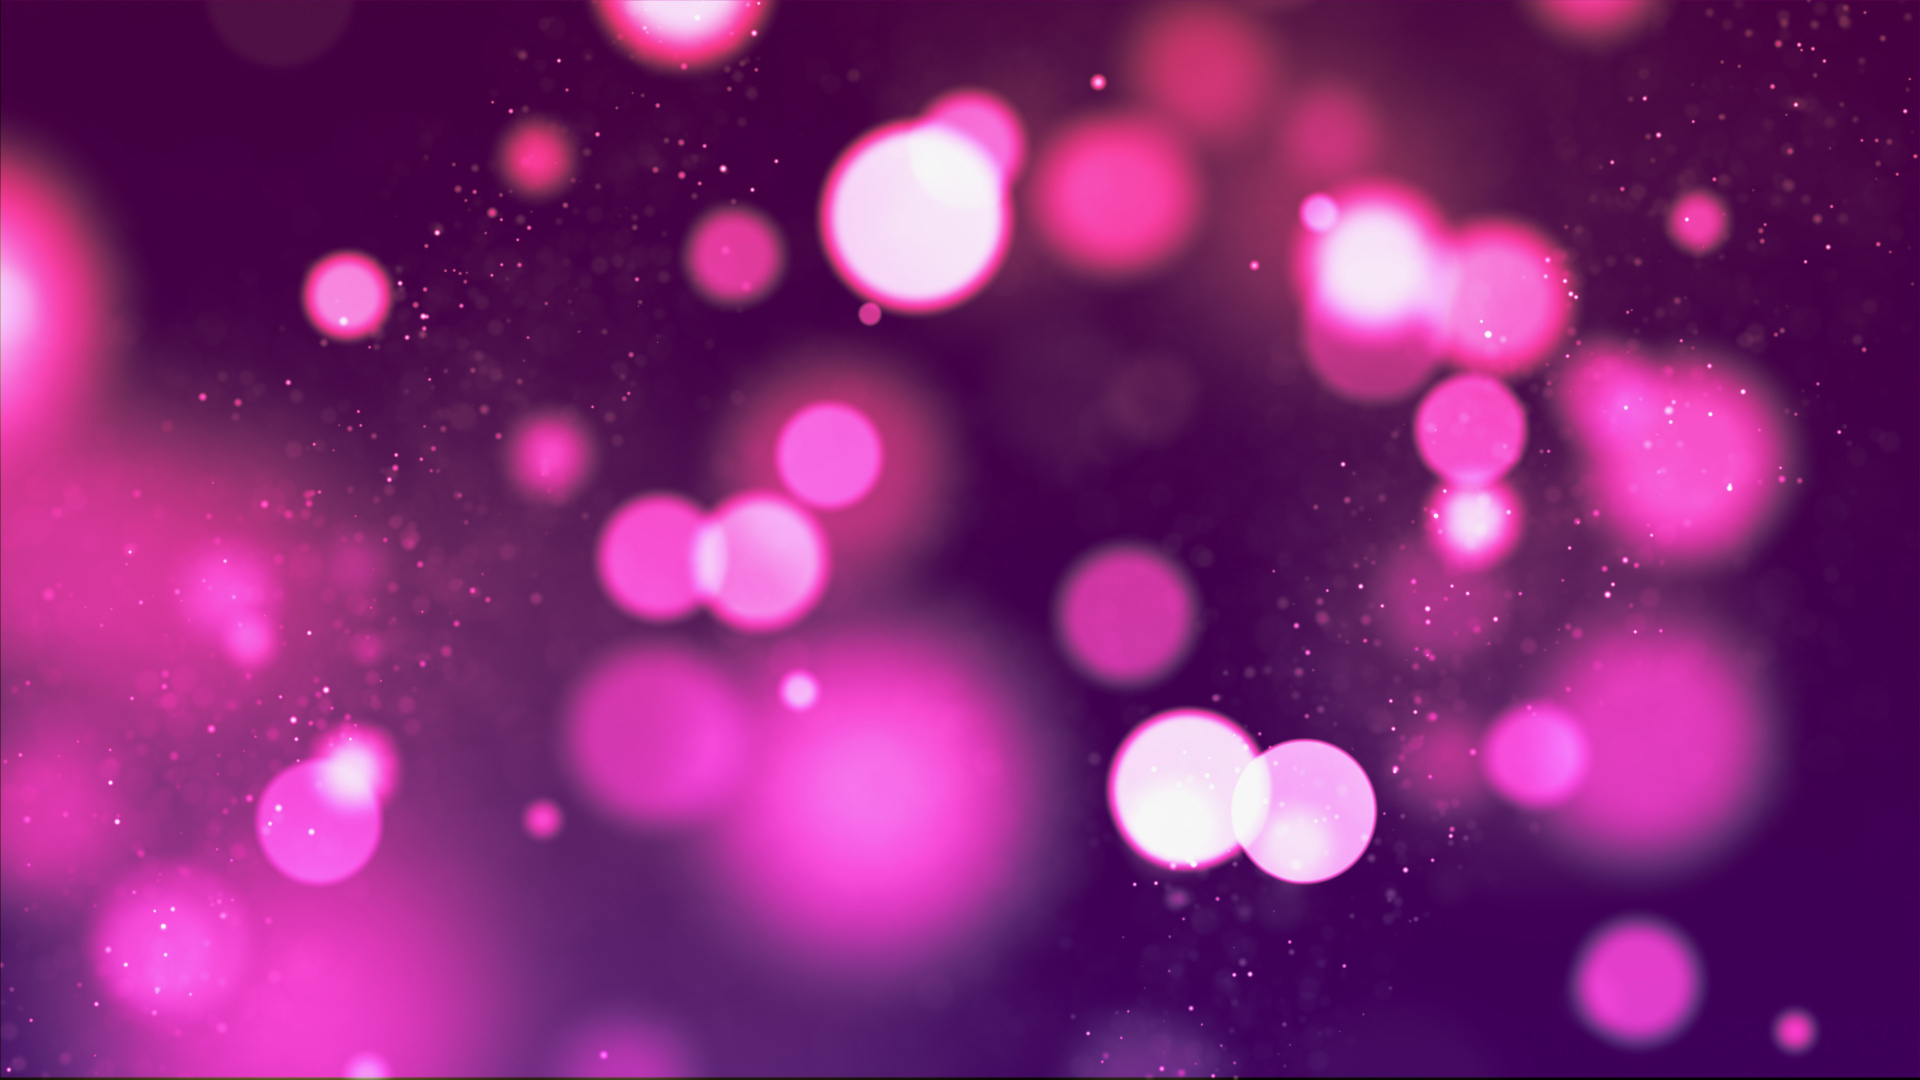 White and Pink Heart Lights. Wallpaper in 1920x1080 Resolution